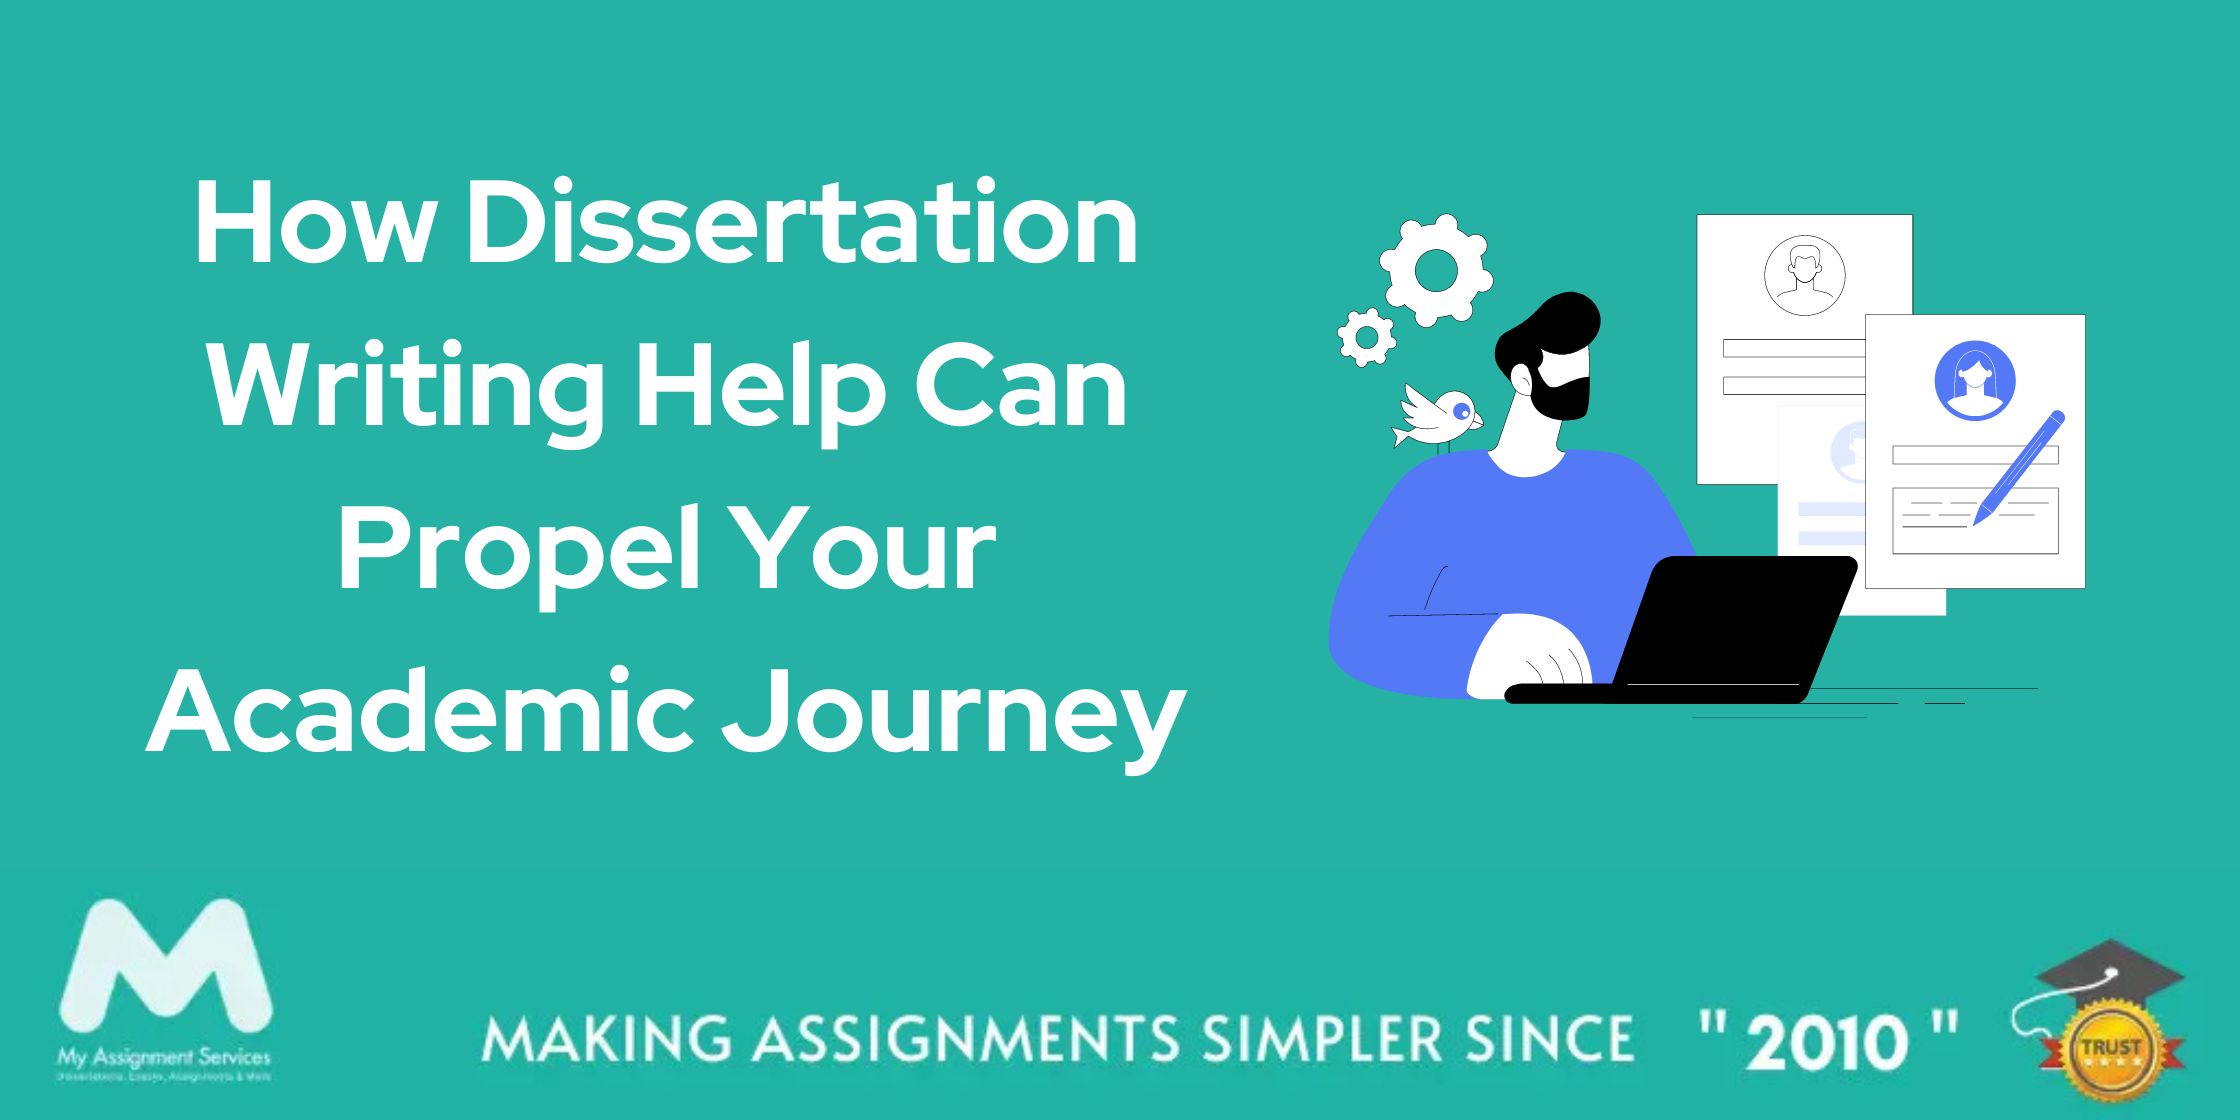 How Dissertation Writing Help Can Propel Your Academic Journey